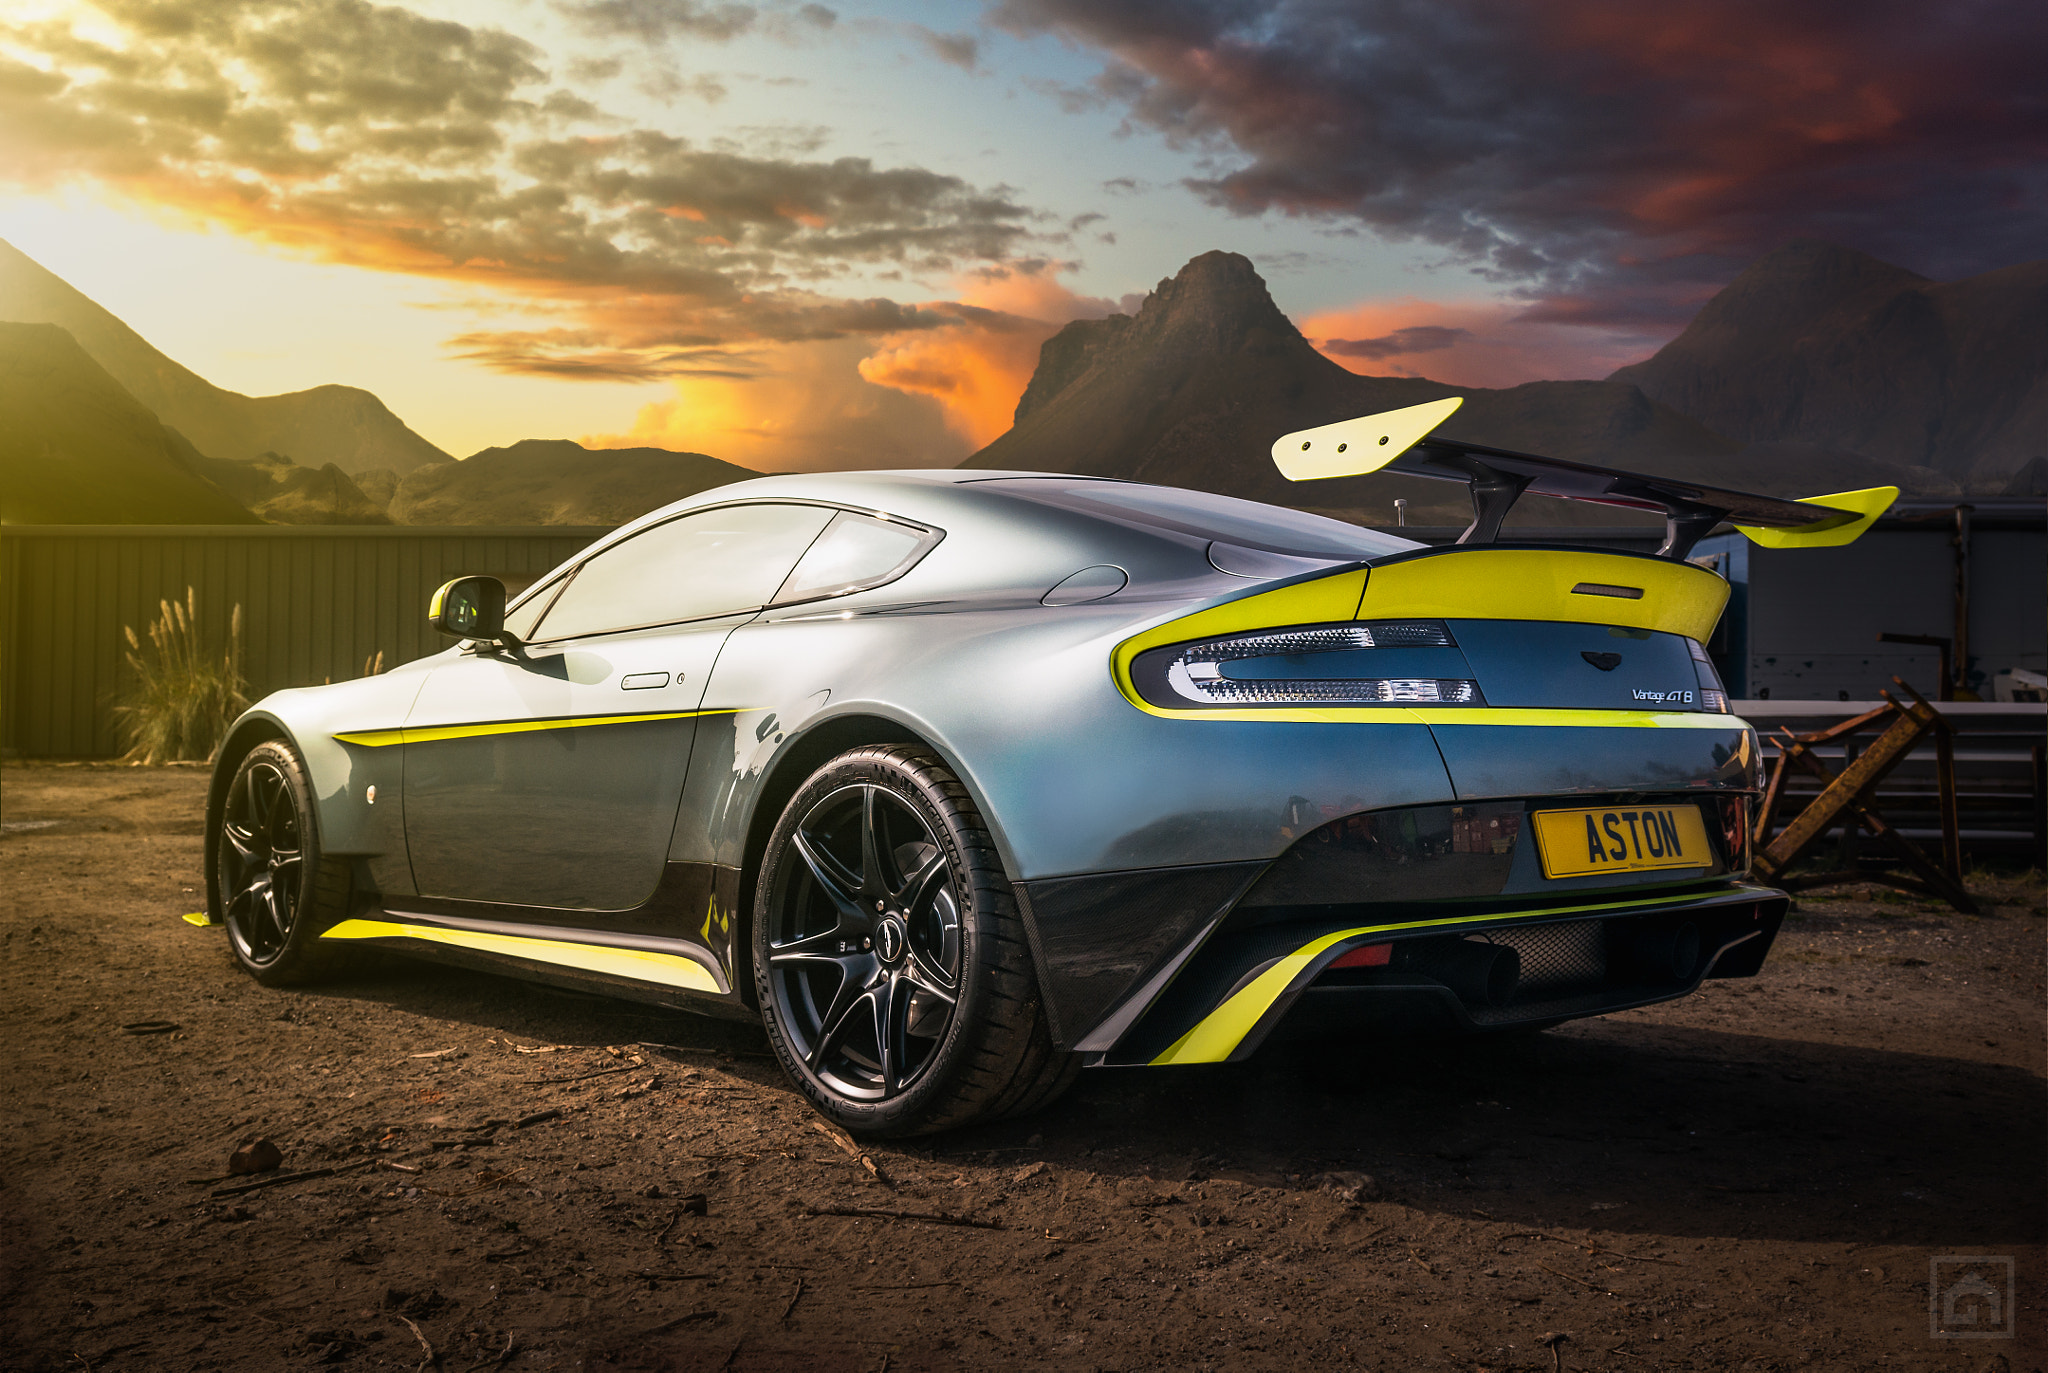 General 2048x1373 Aston Martin car sky sunlight vehicle Aston Martin Vantage British cars Grand Tour 500px clouds sunset sunset glow mountains rear view licence plates watermarked